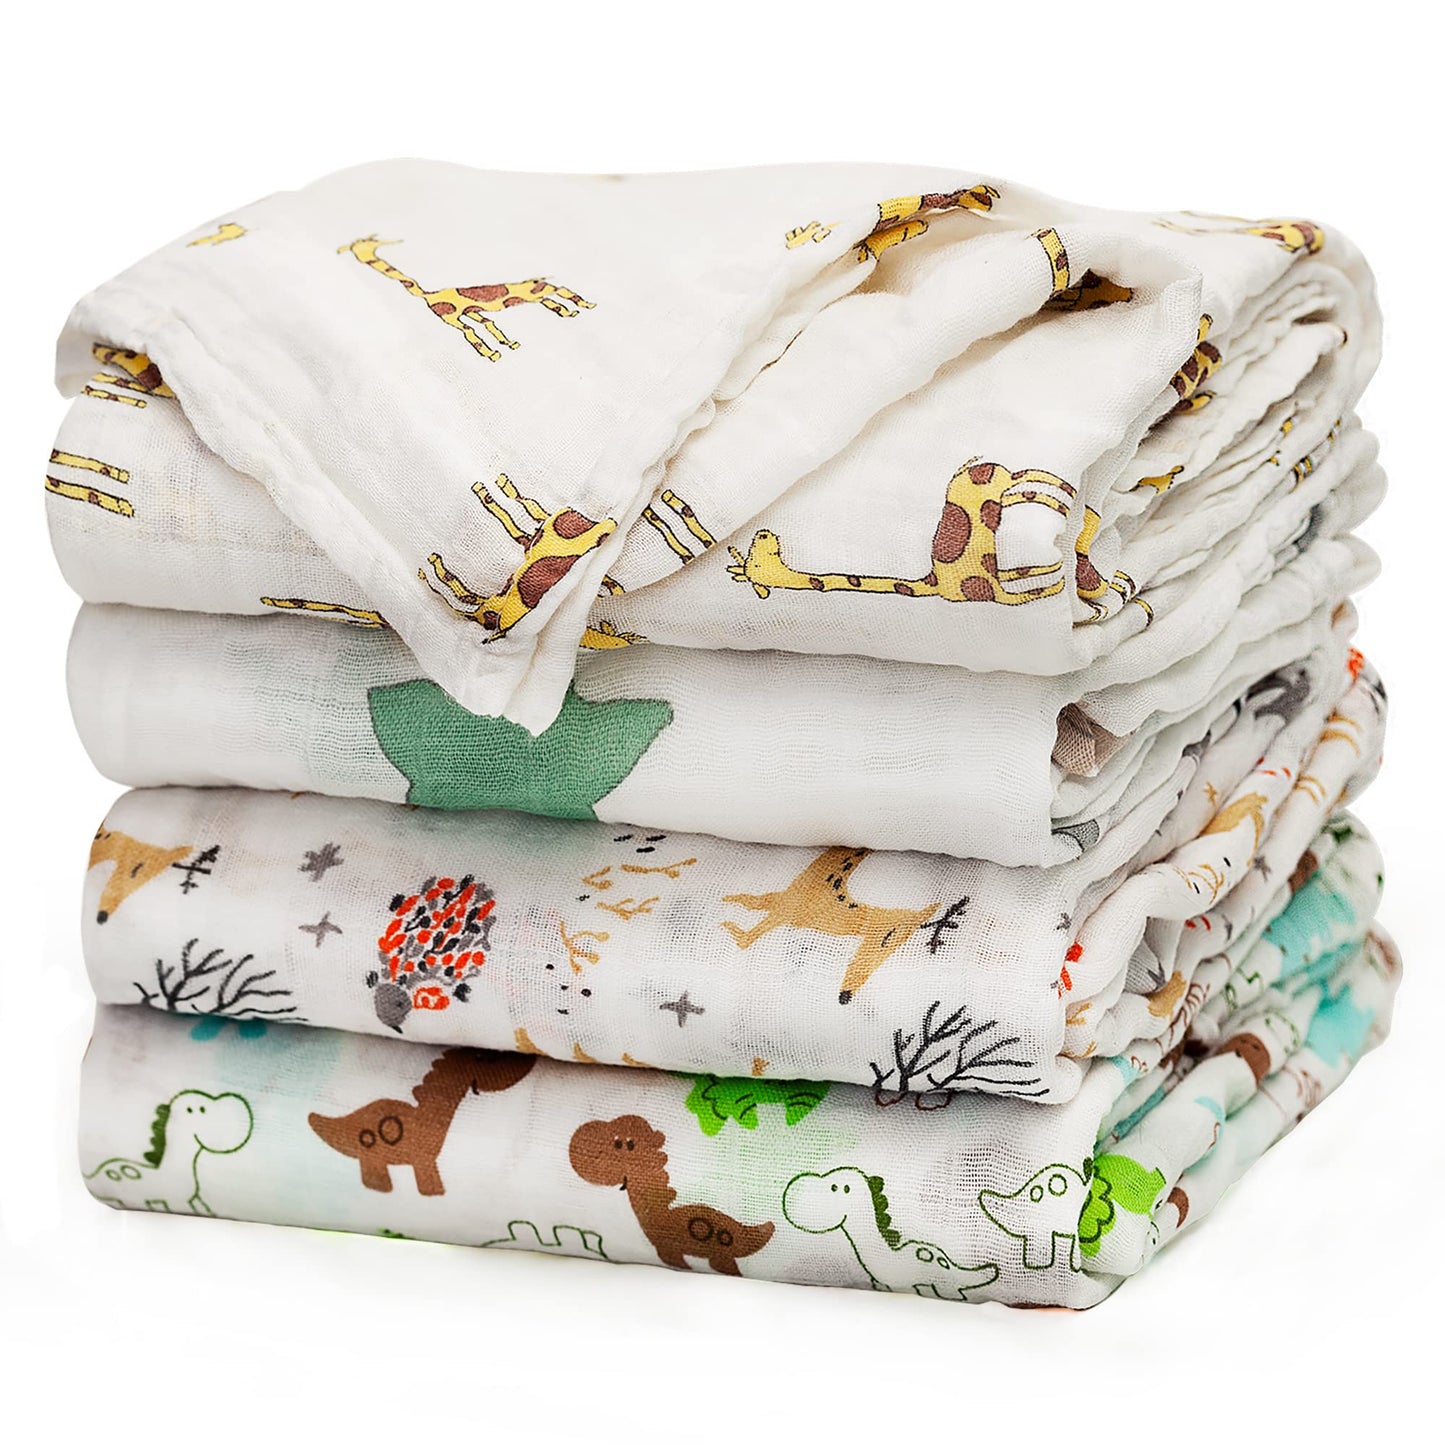 upsimples Baby Swaddle Blanket Unisex Swaddle Wrap Soft Silky Muslin Swaddle Blankets Neutral Receiving Blanket for Boys and Girls, Large 47 x 47 inches, Set of 4-Arrow/Feather/Tent/Crisscross